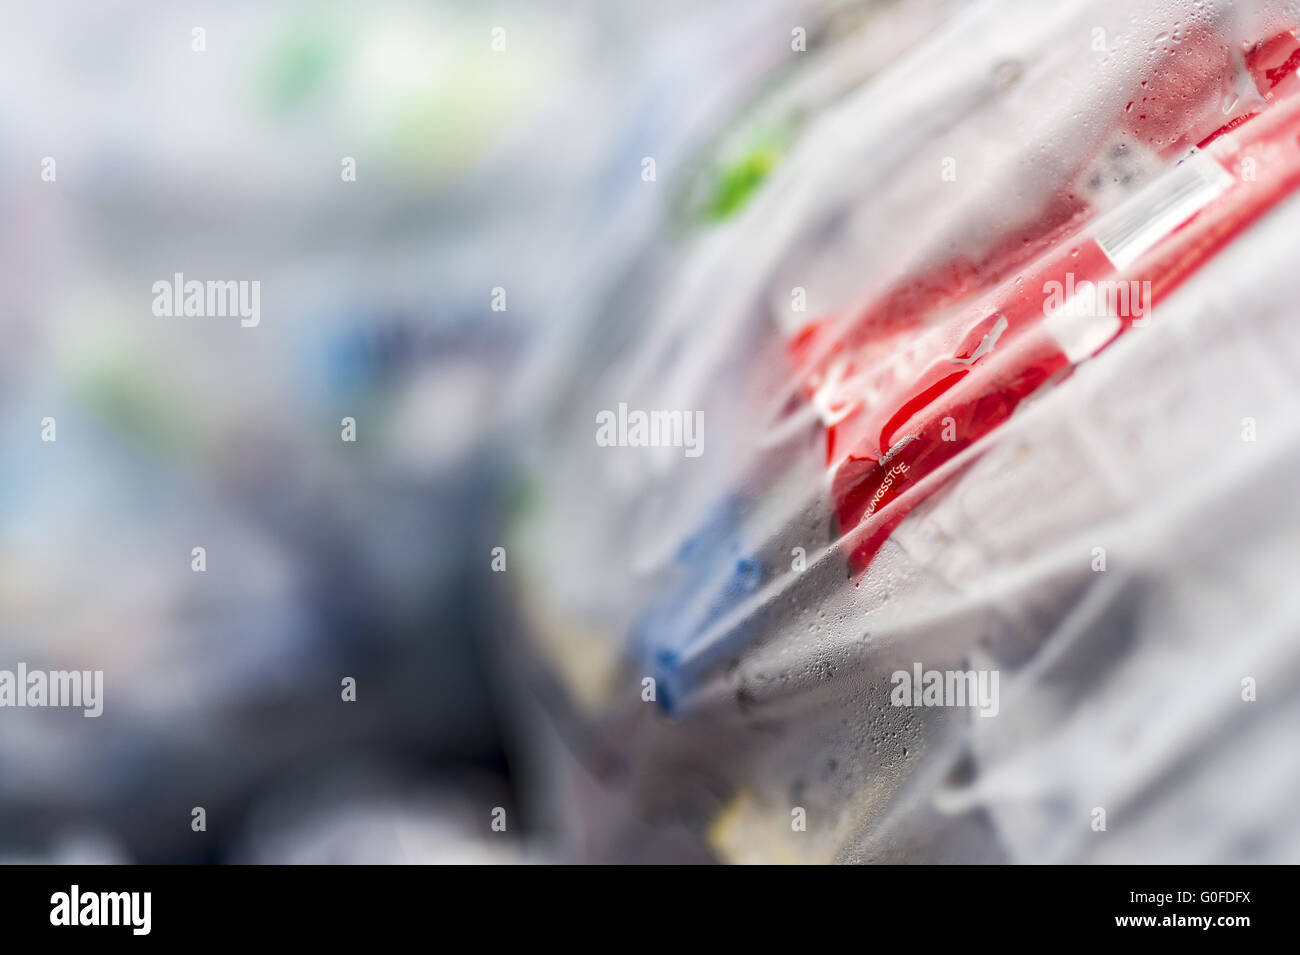 Packaging waste in a transparent garbage bag. Stock Photo